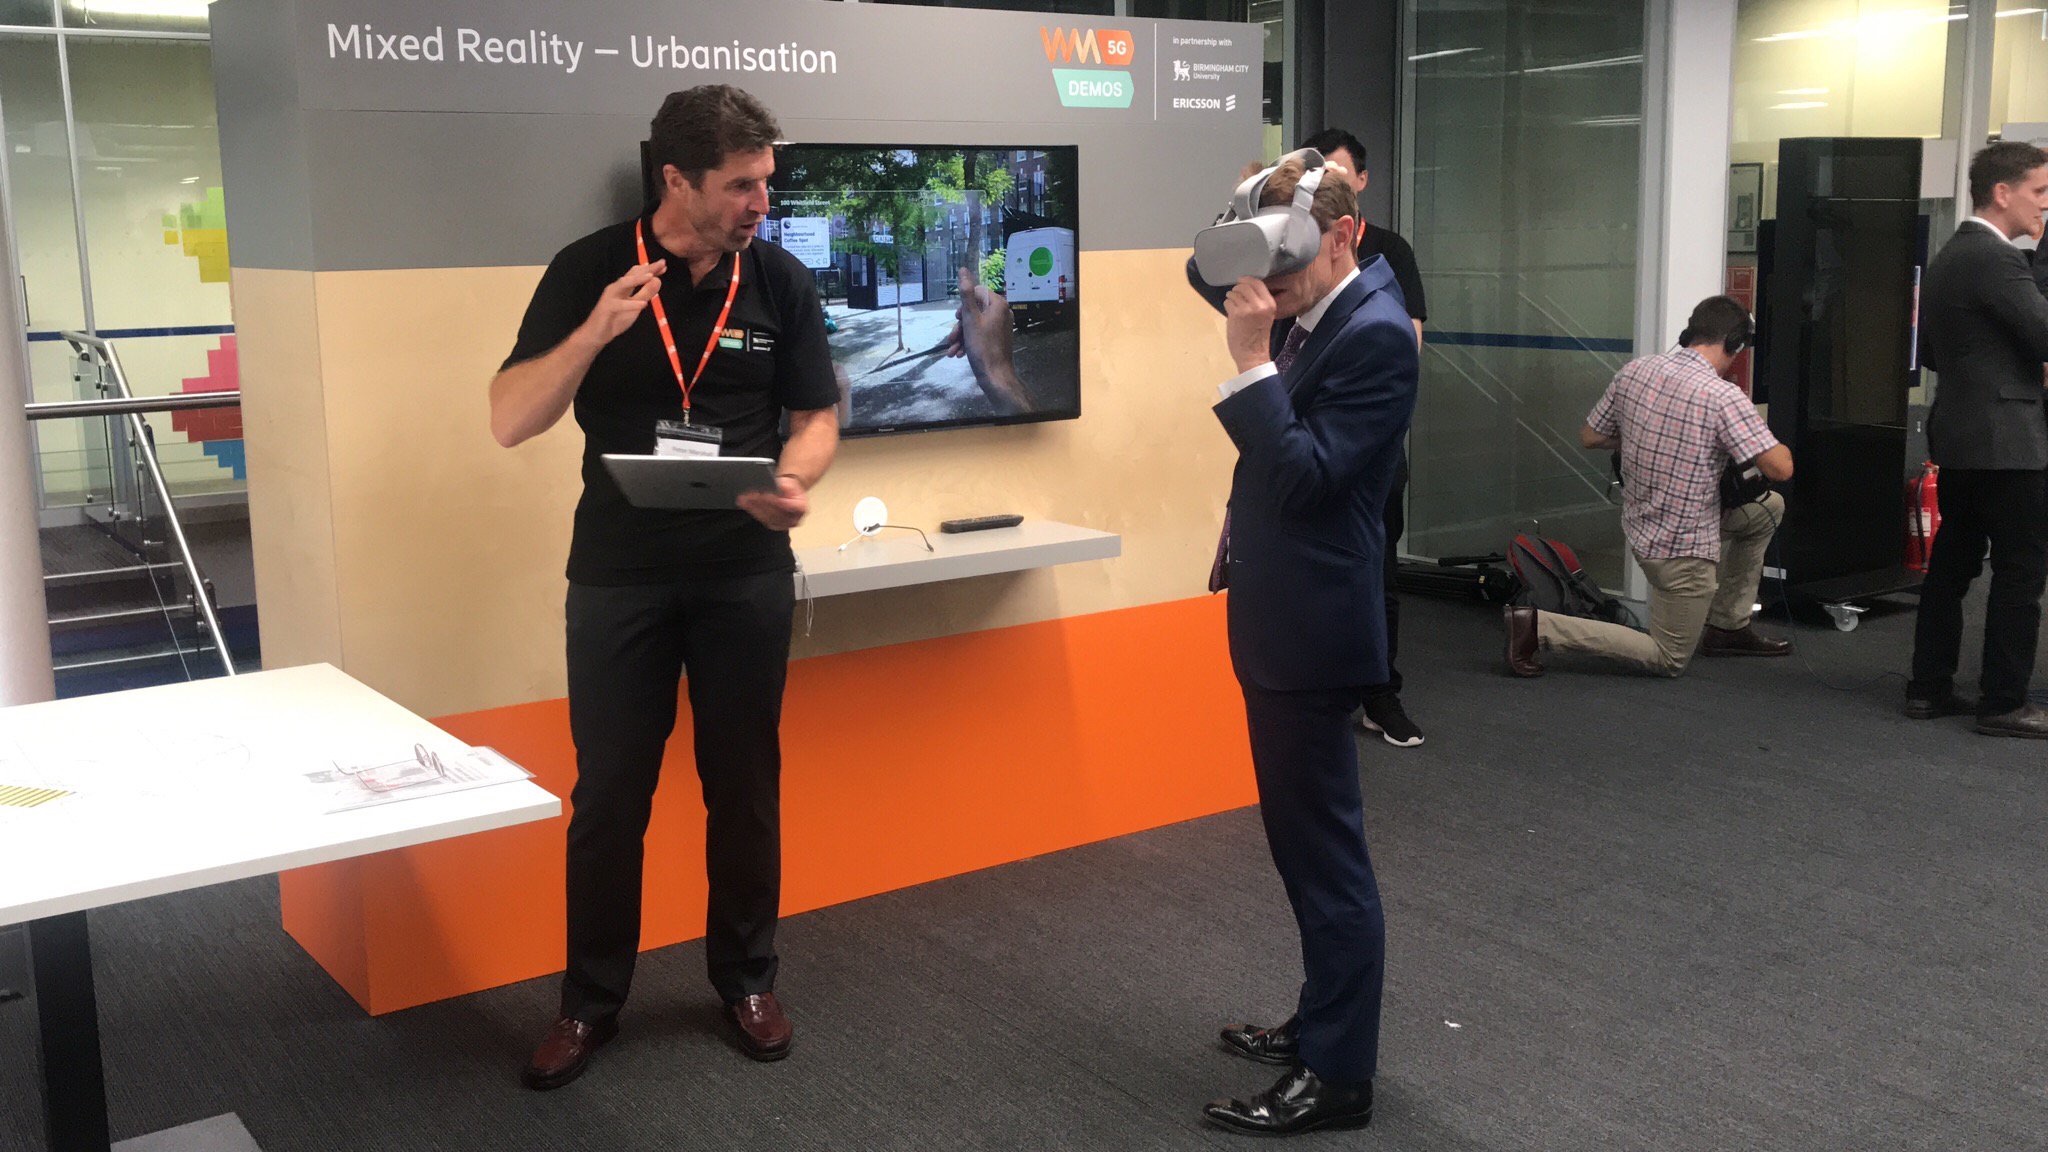 Mayor of the West Midlands Andy Street (right) experiences a virtual reality application as part of the 5G demonstration